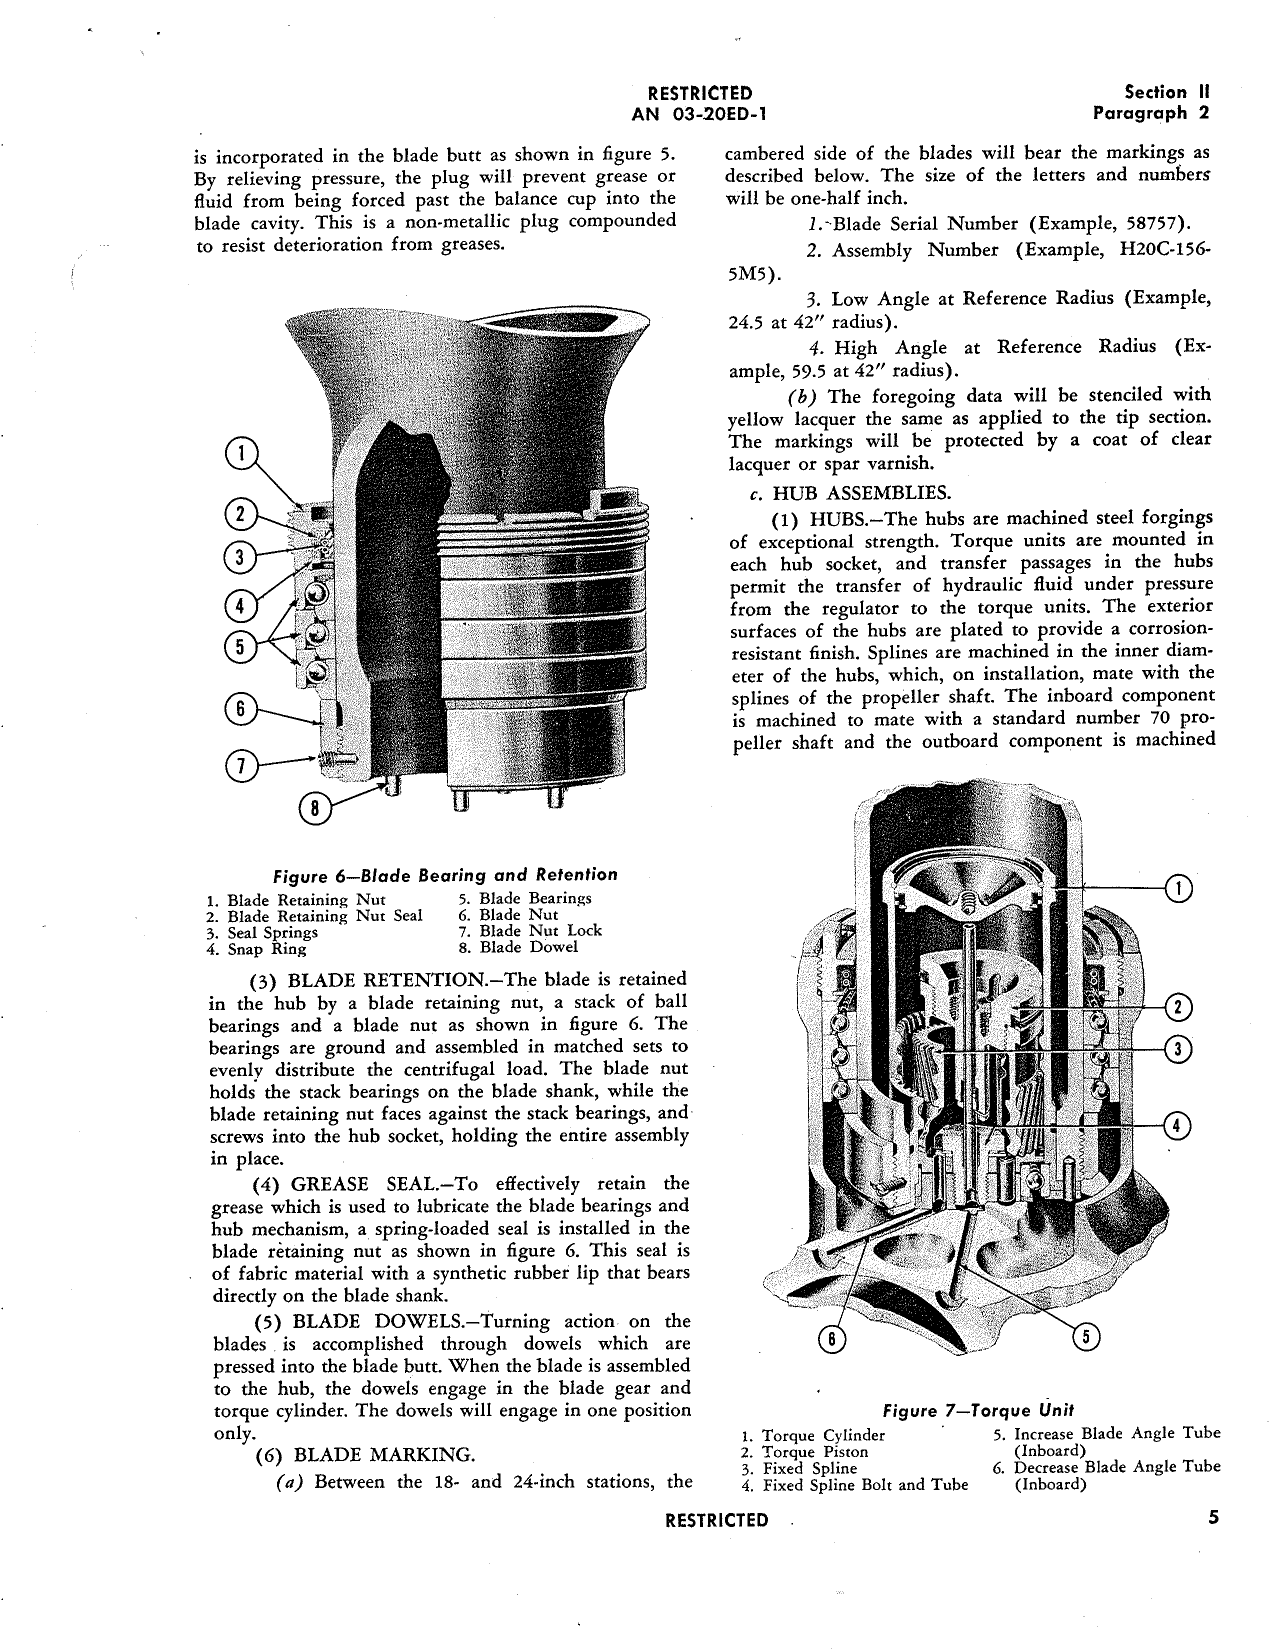 Sample page 9 from AirCorps Library document: Overhaul Manual Aeroproducts AD7562